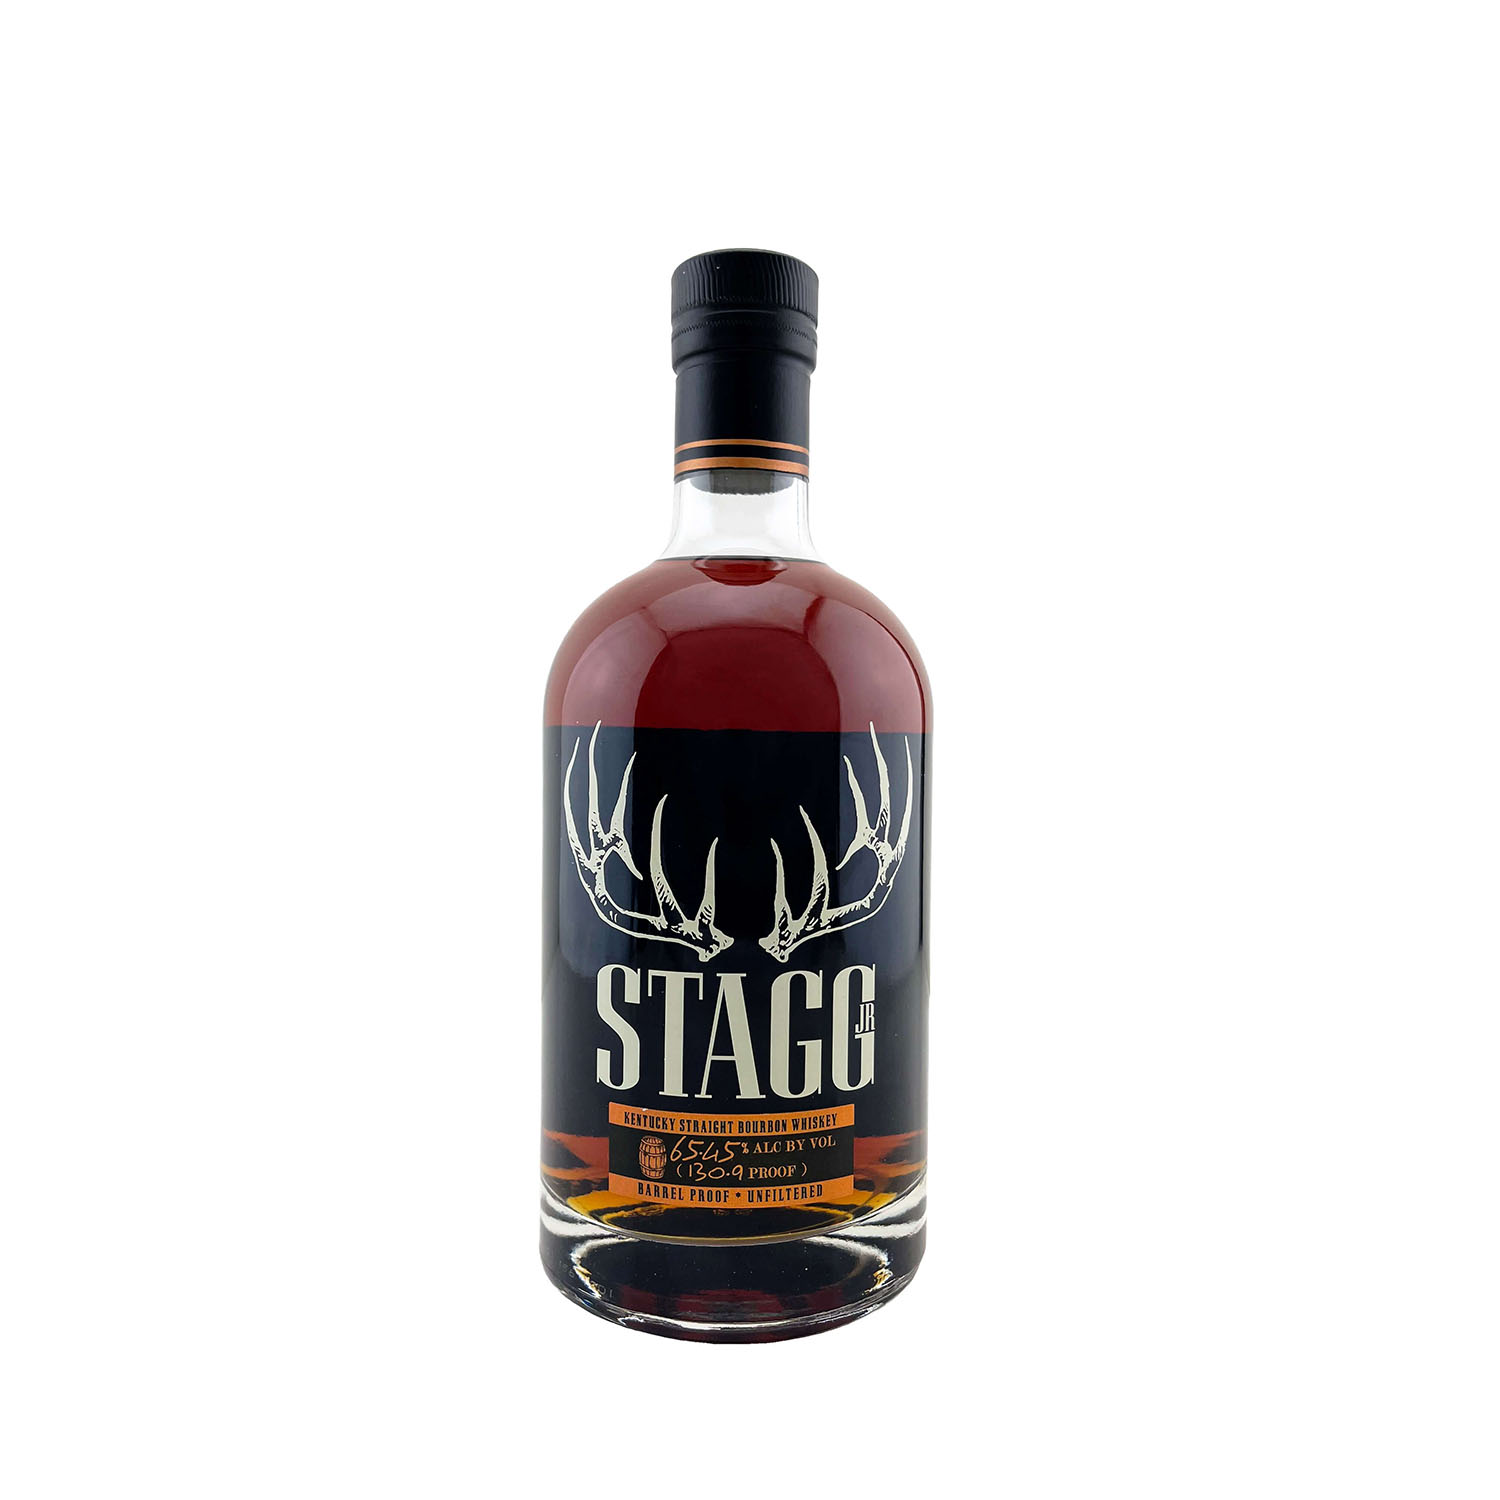 Stagg Jr 65.45% / 130.9 Proof